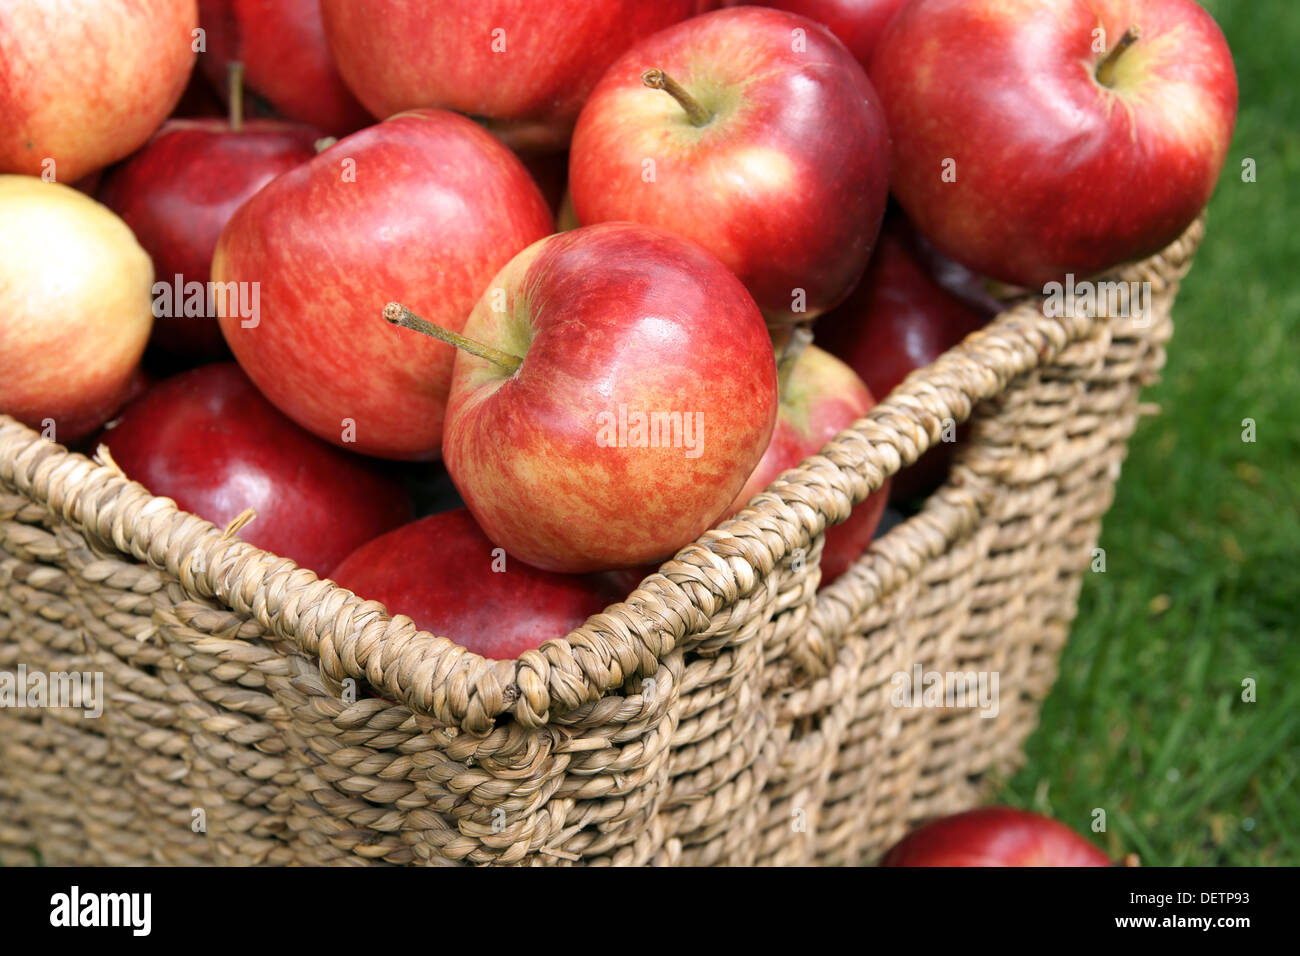 Red shiny Discovery apples freshly harvested Stock Photo